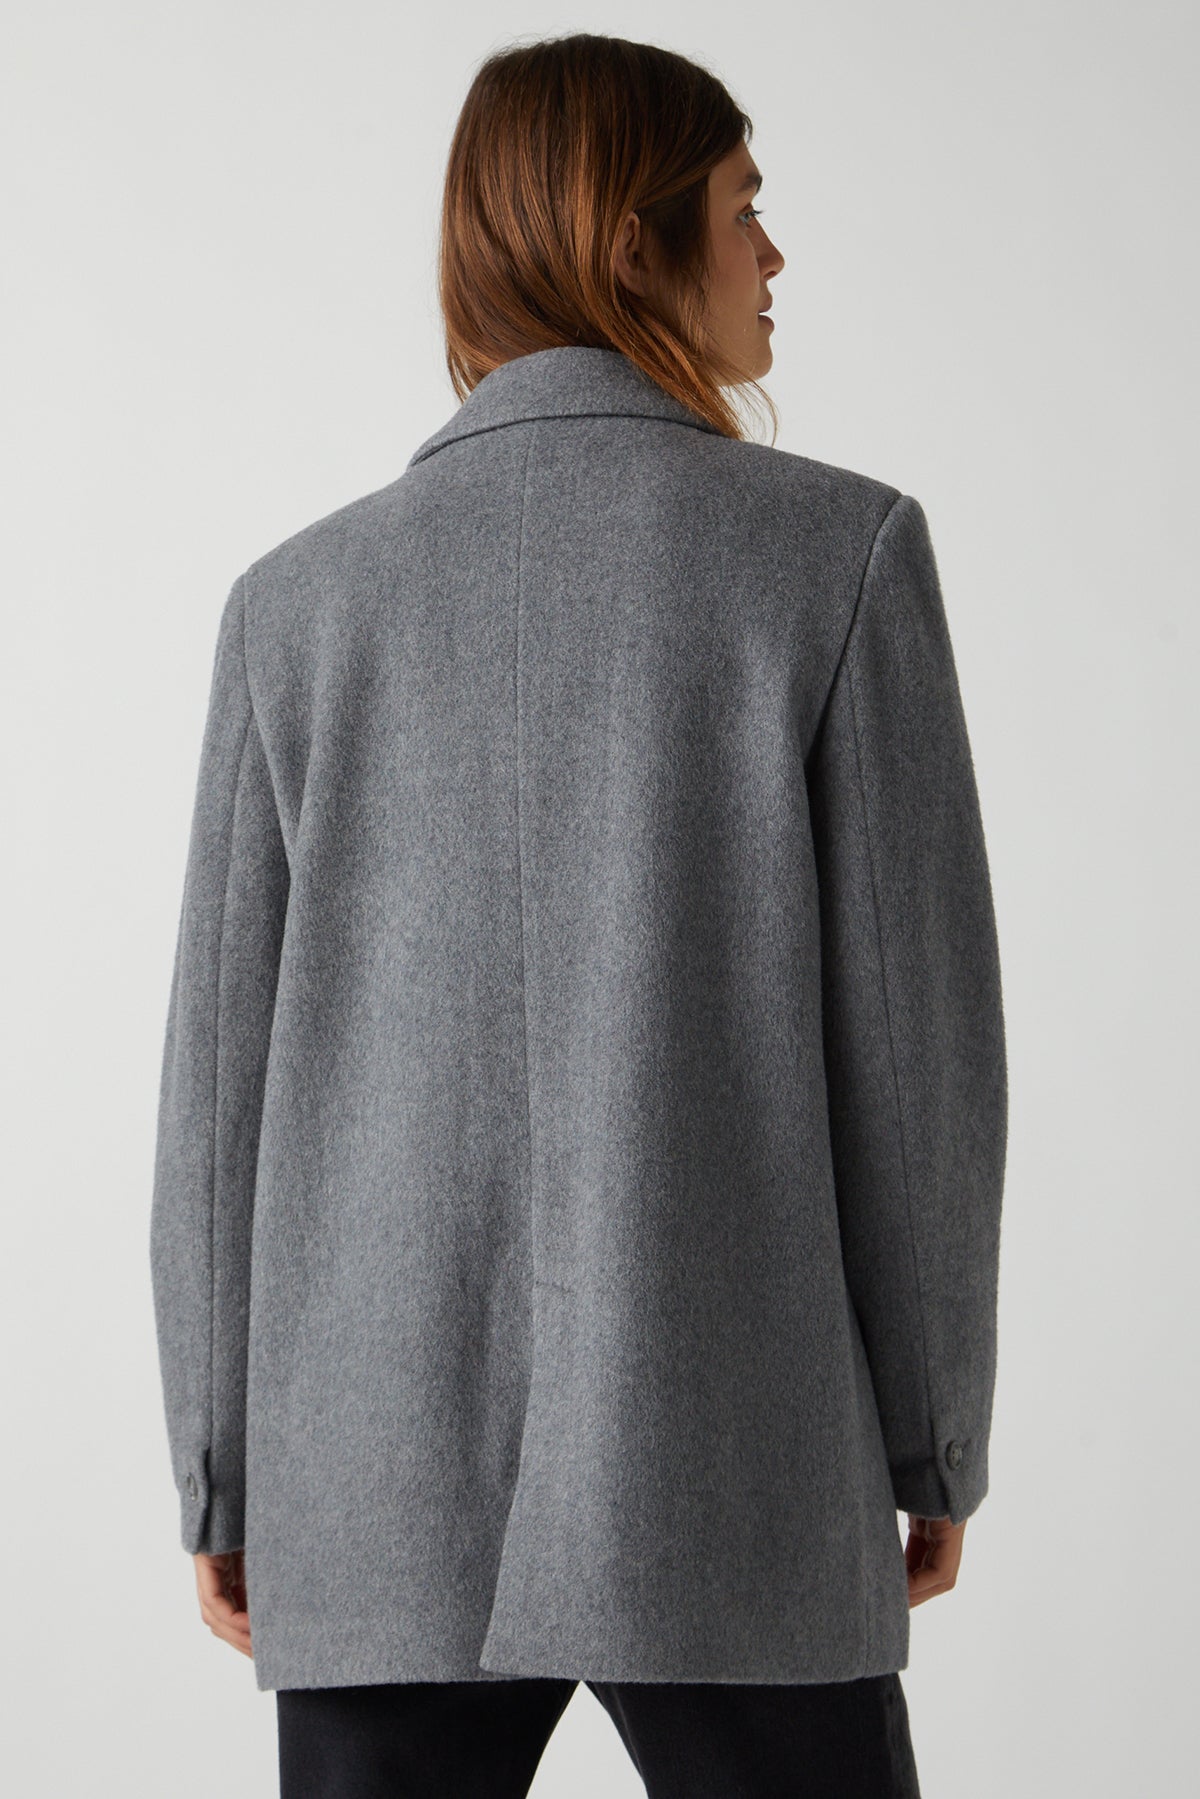 The back view of a woman wearing the Velvet by Jenny Graham ALAMOS BLAZER.-25483348771009